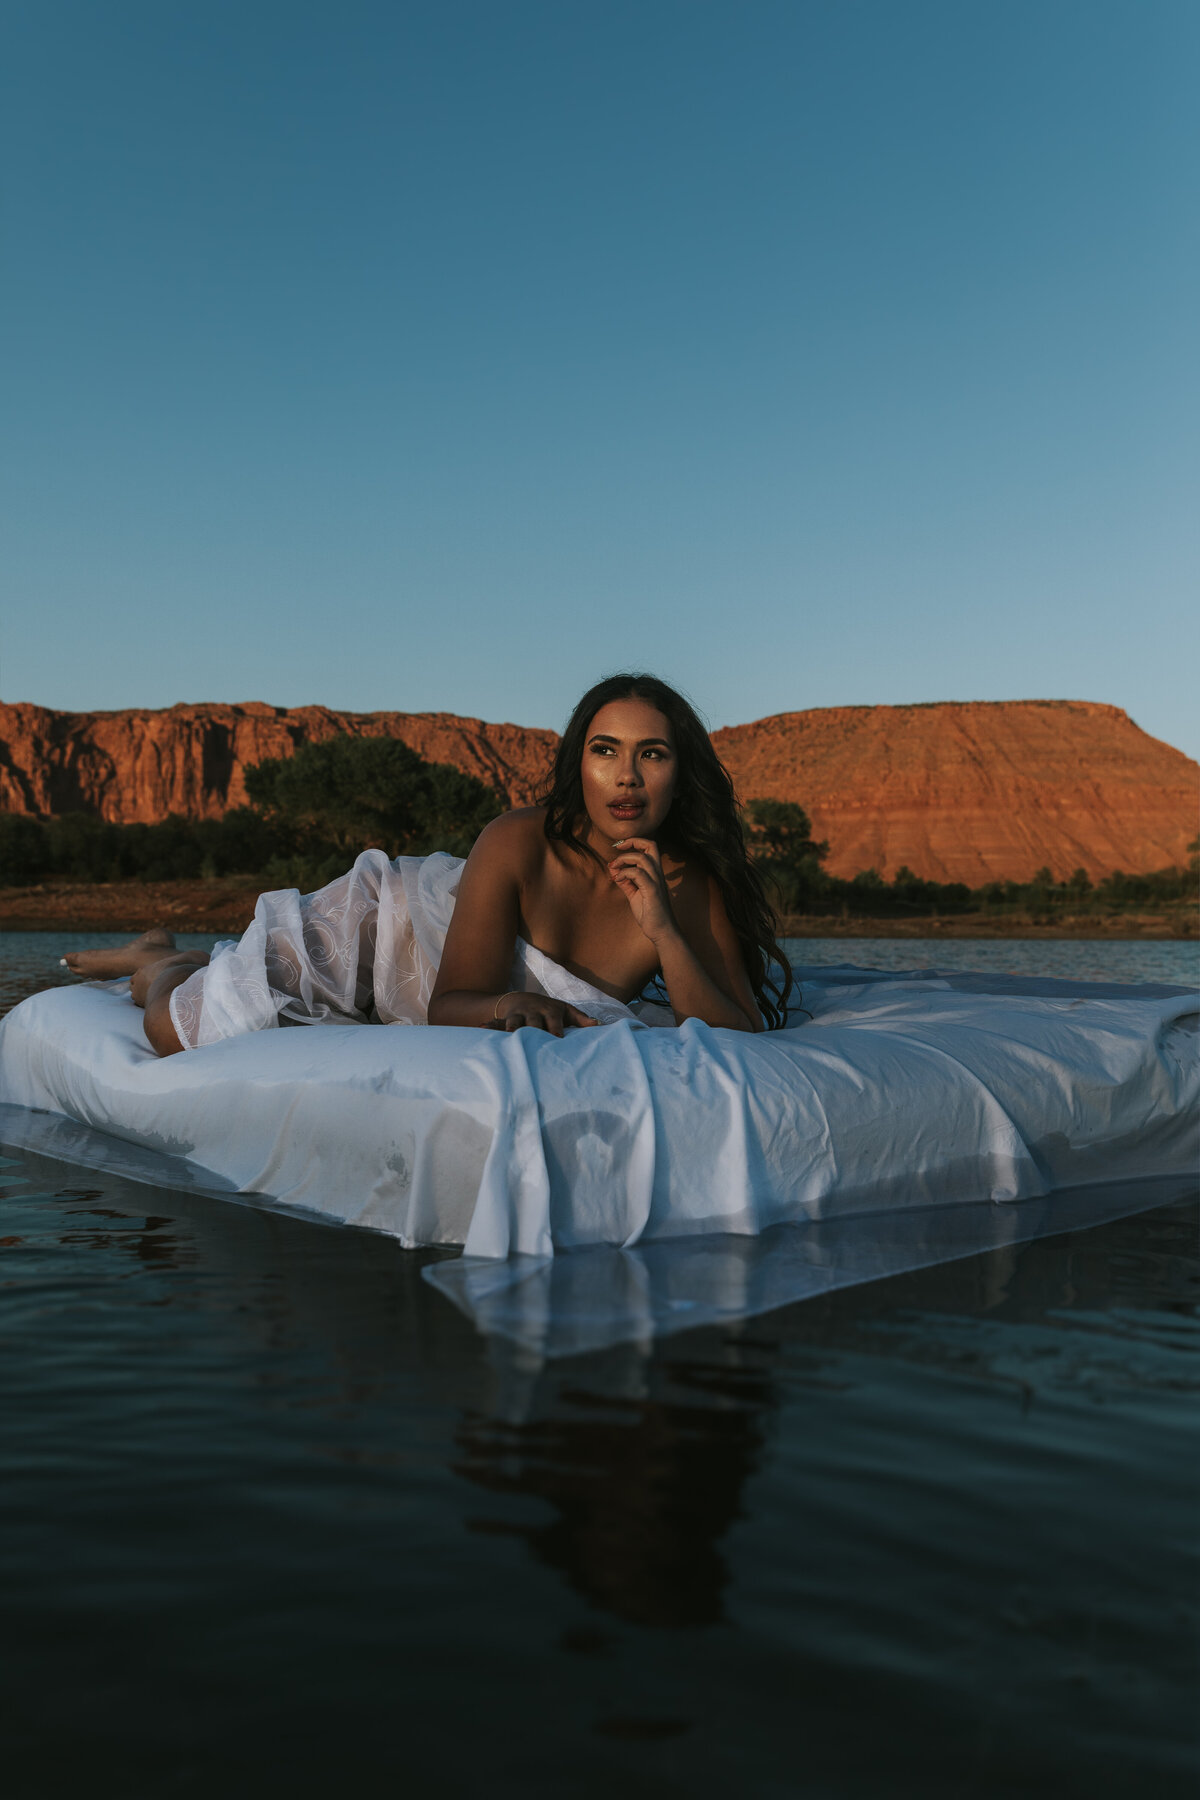 Woman is floating on a blow up mattress in the middle of the lake with only sheets covering her